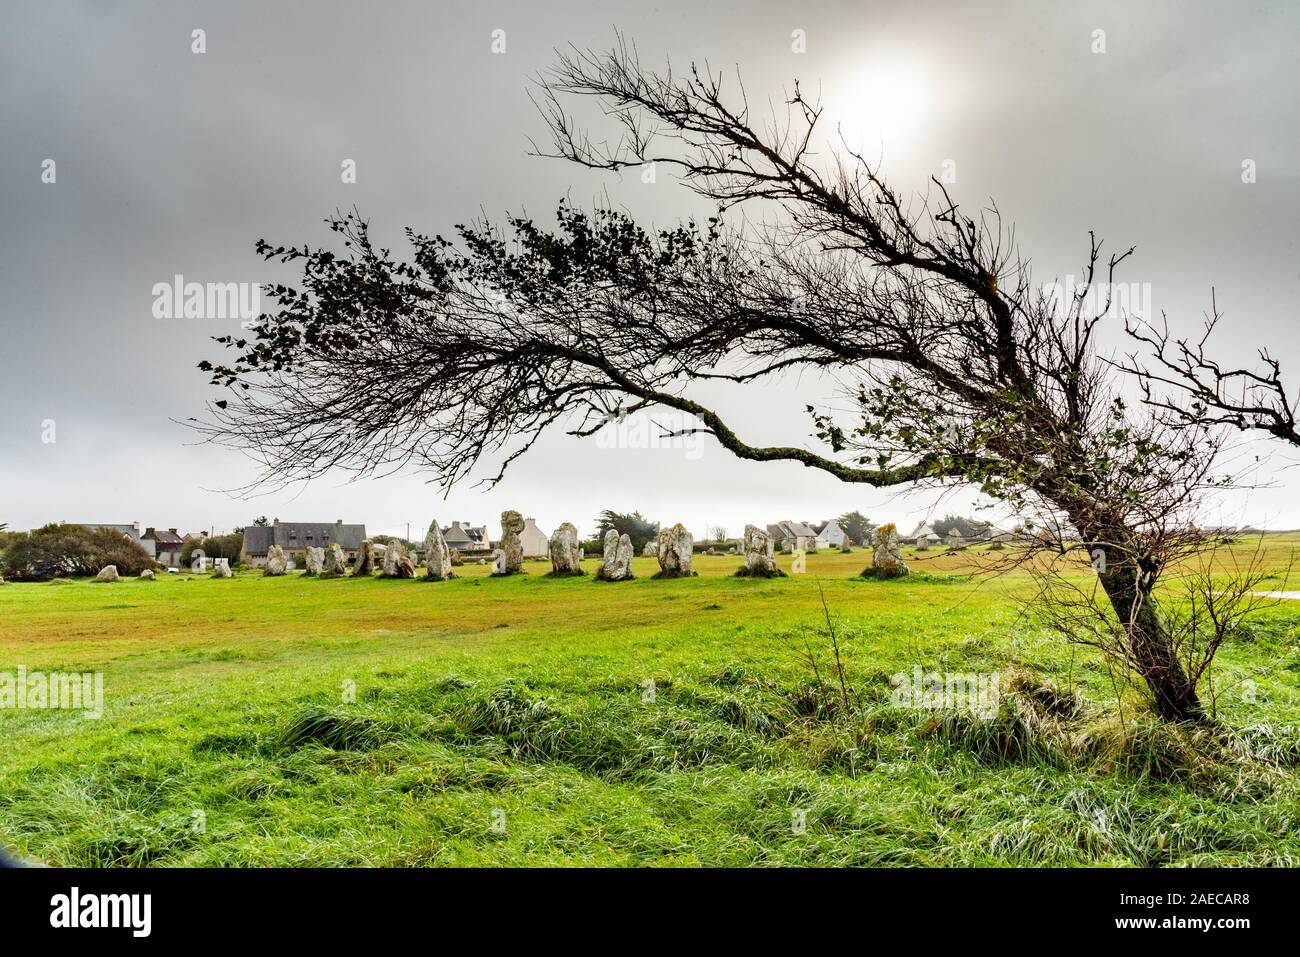 Standing stones in Brittany. A deformed tree lying by the force of the wind stands in front of an alignment of menhirs on a green meadow on a rainy da Stock Photo